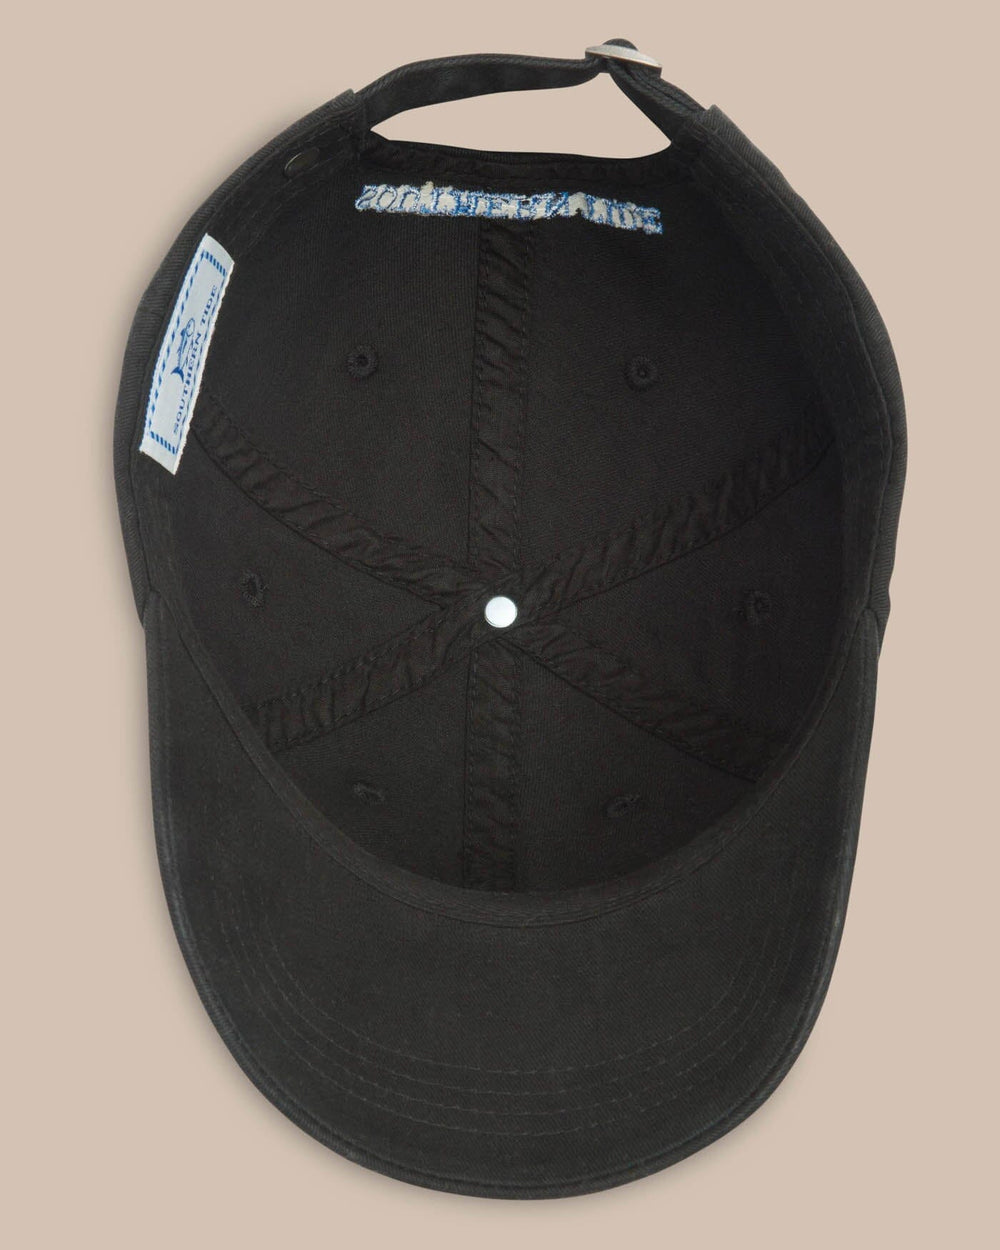 The inside of the Skipjack Hat by Southern Tide - Black